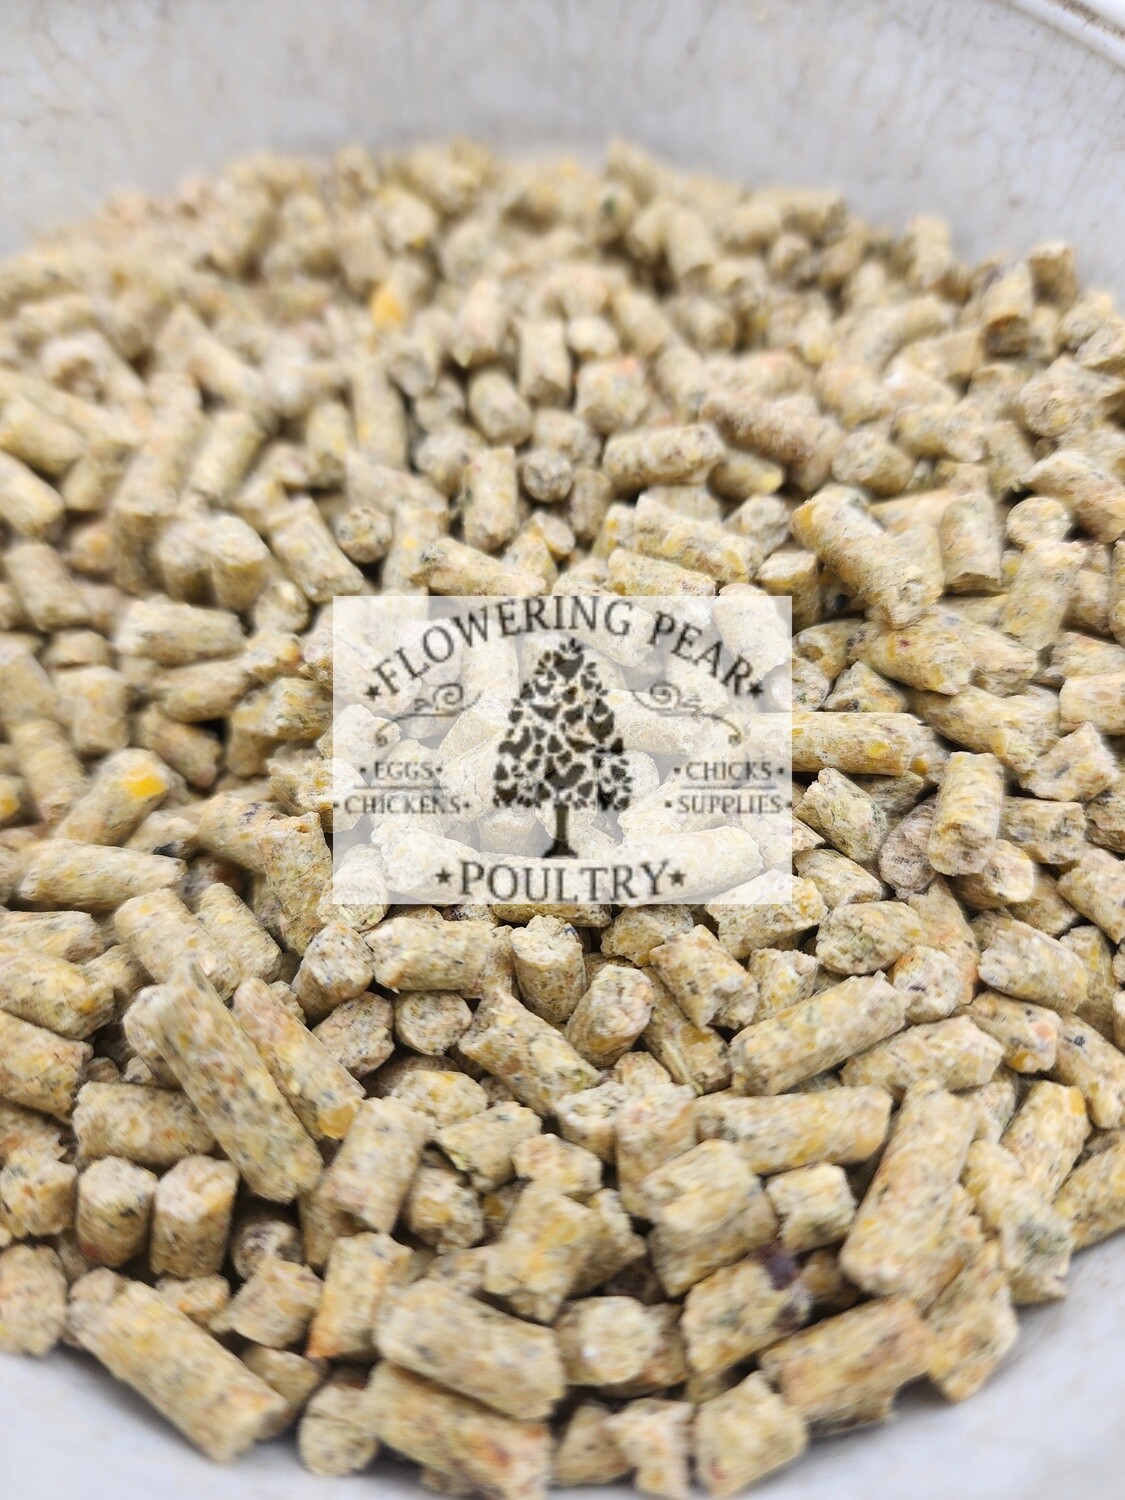 Original SPECIAL BLEND Flowering Pear Poultry recipe WINTER blend LAYER Feed 19% protein Pellets.